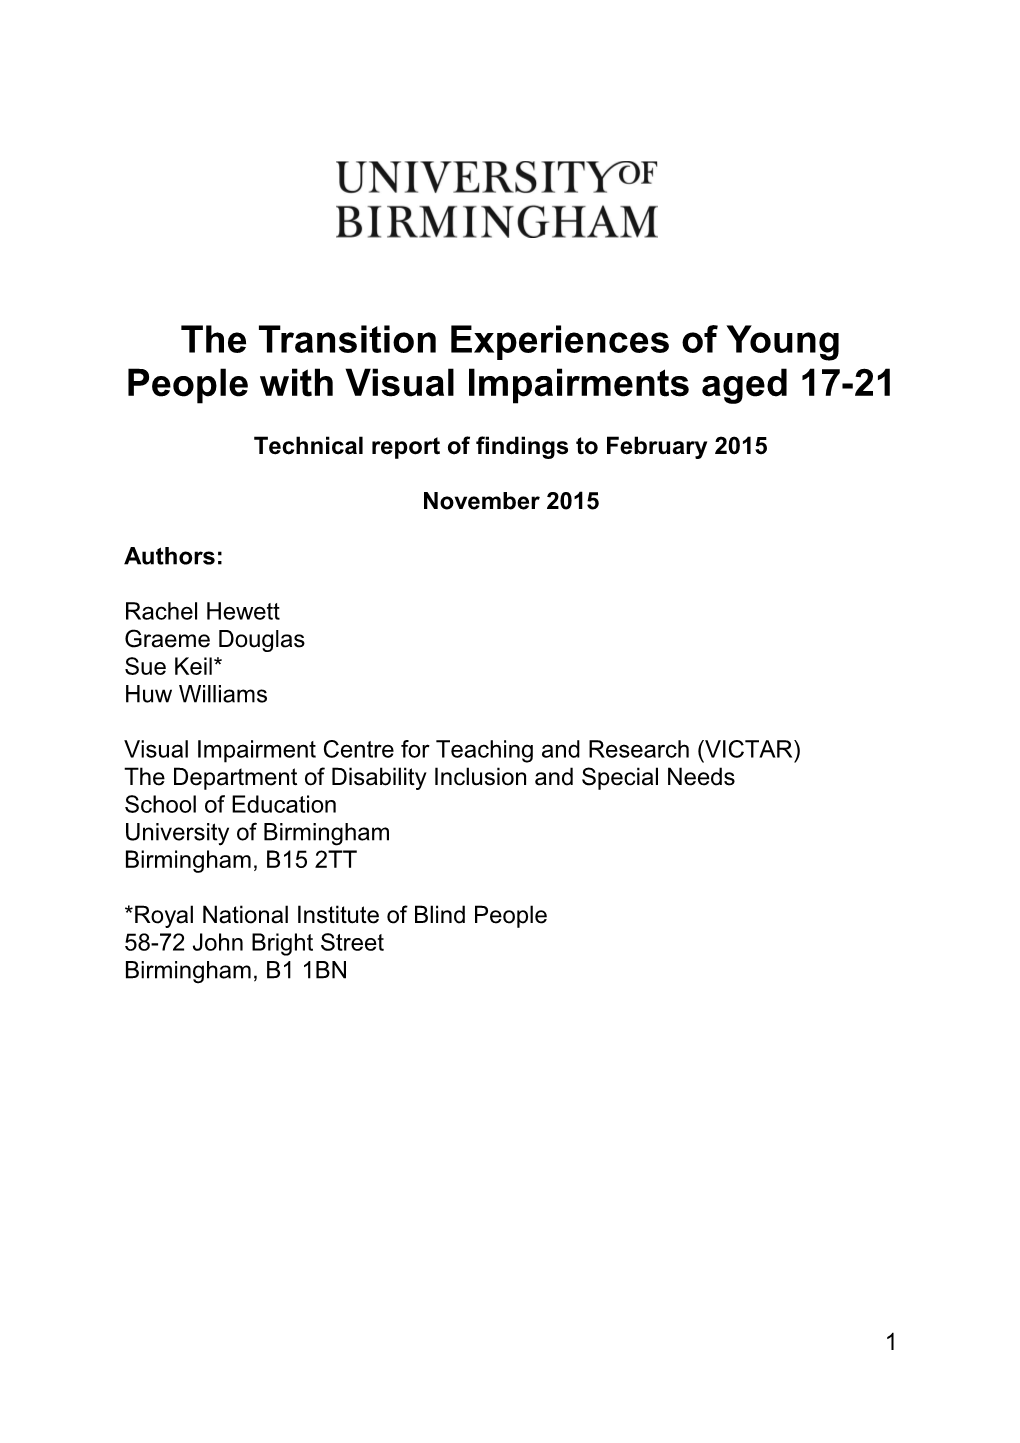 The Transition Experiences of Young People with Visual Impairments Aged 17-21